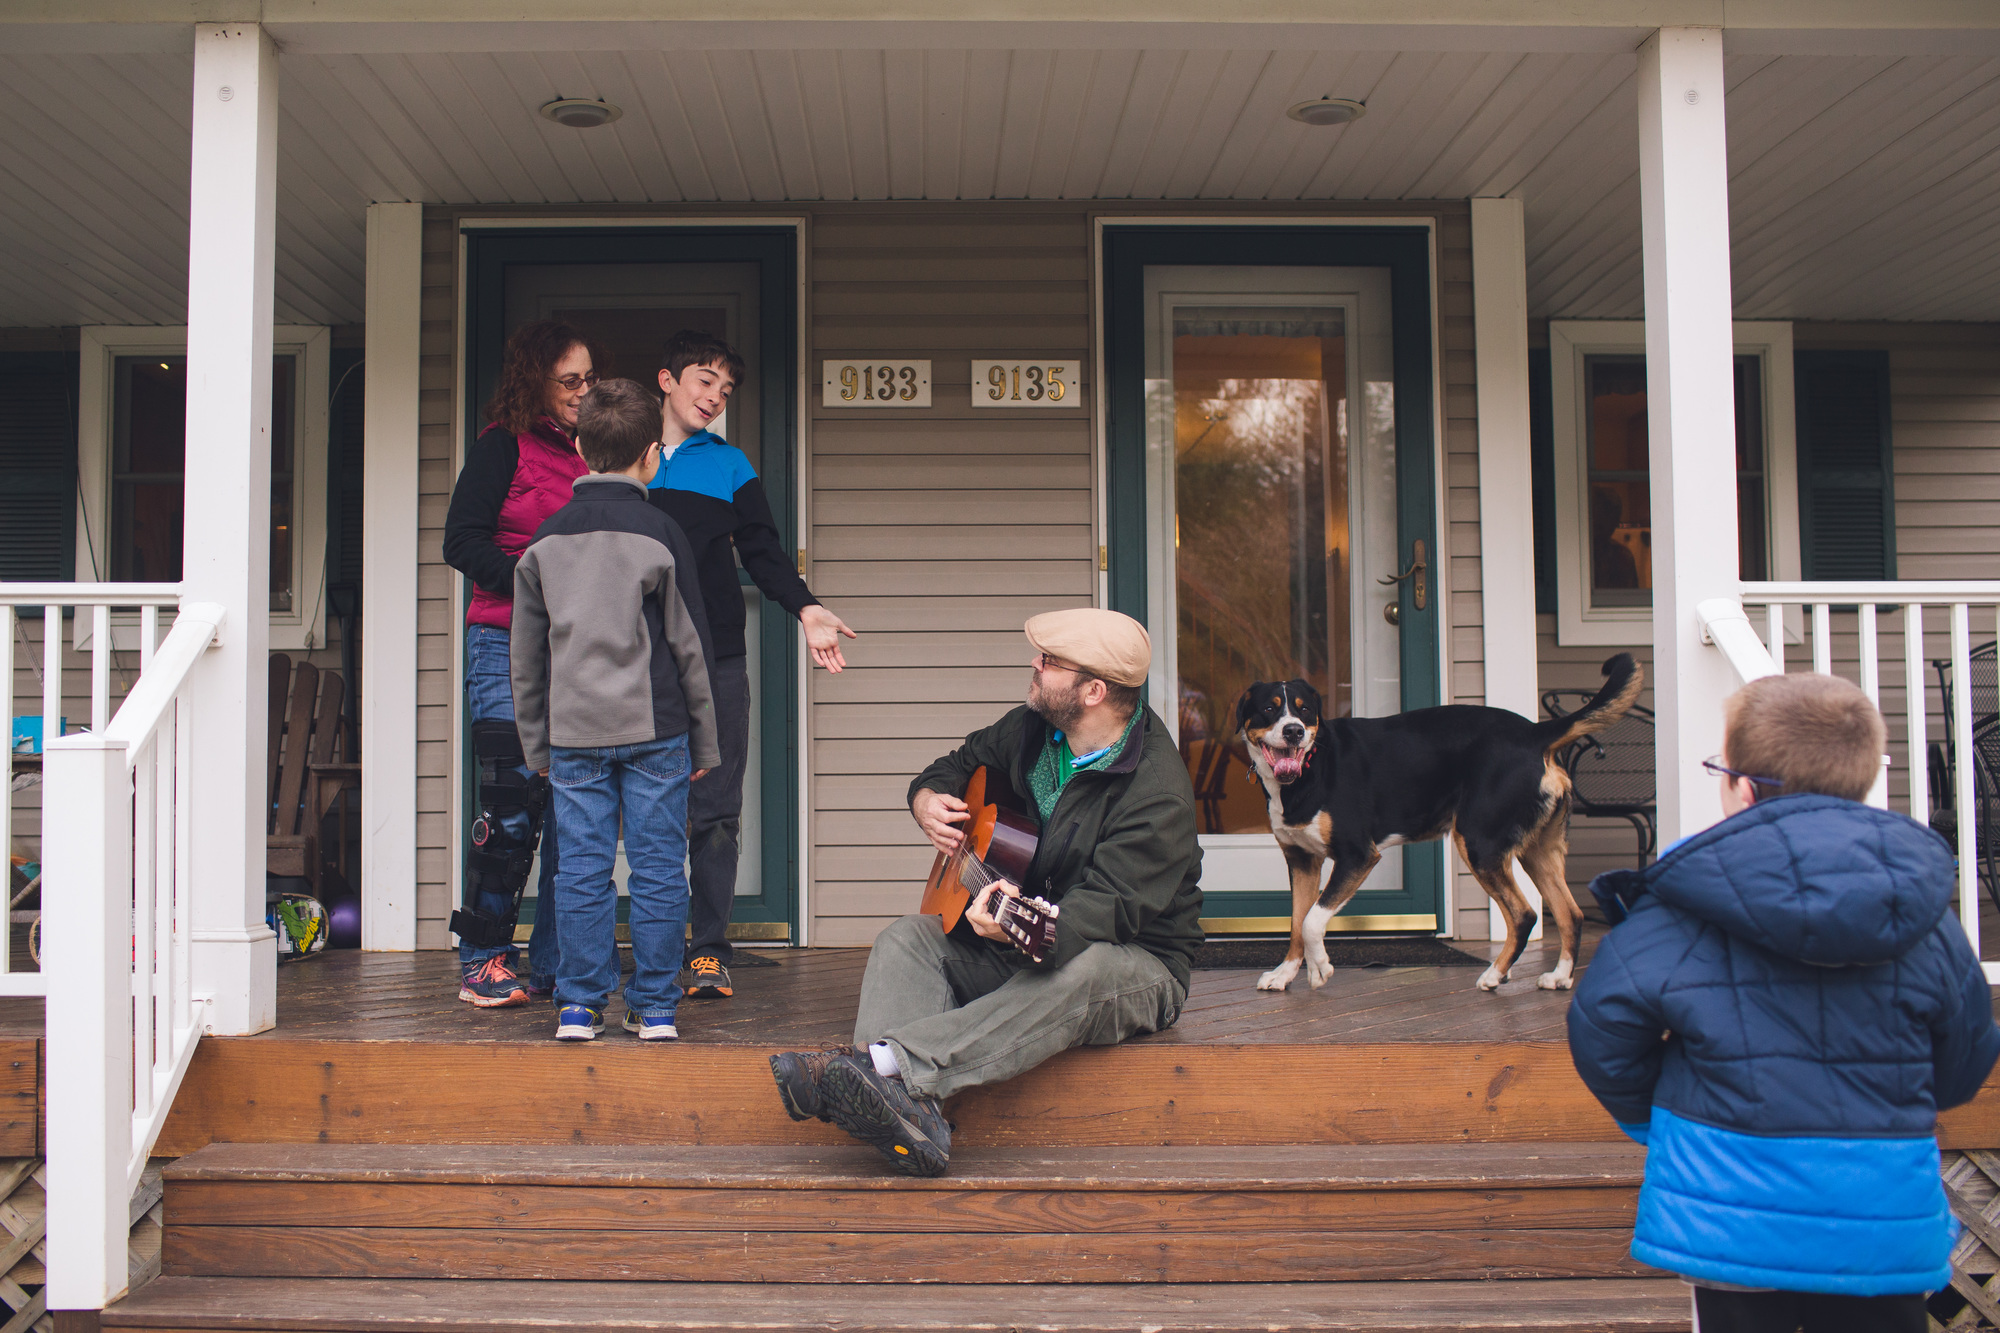 Man with guitar sitting on porch, children standing nearby and a dog looking happy.